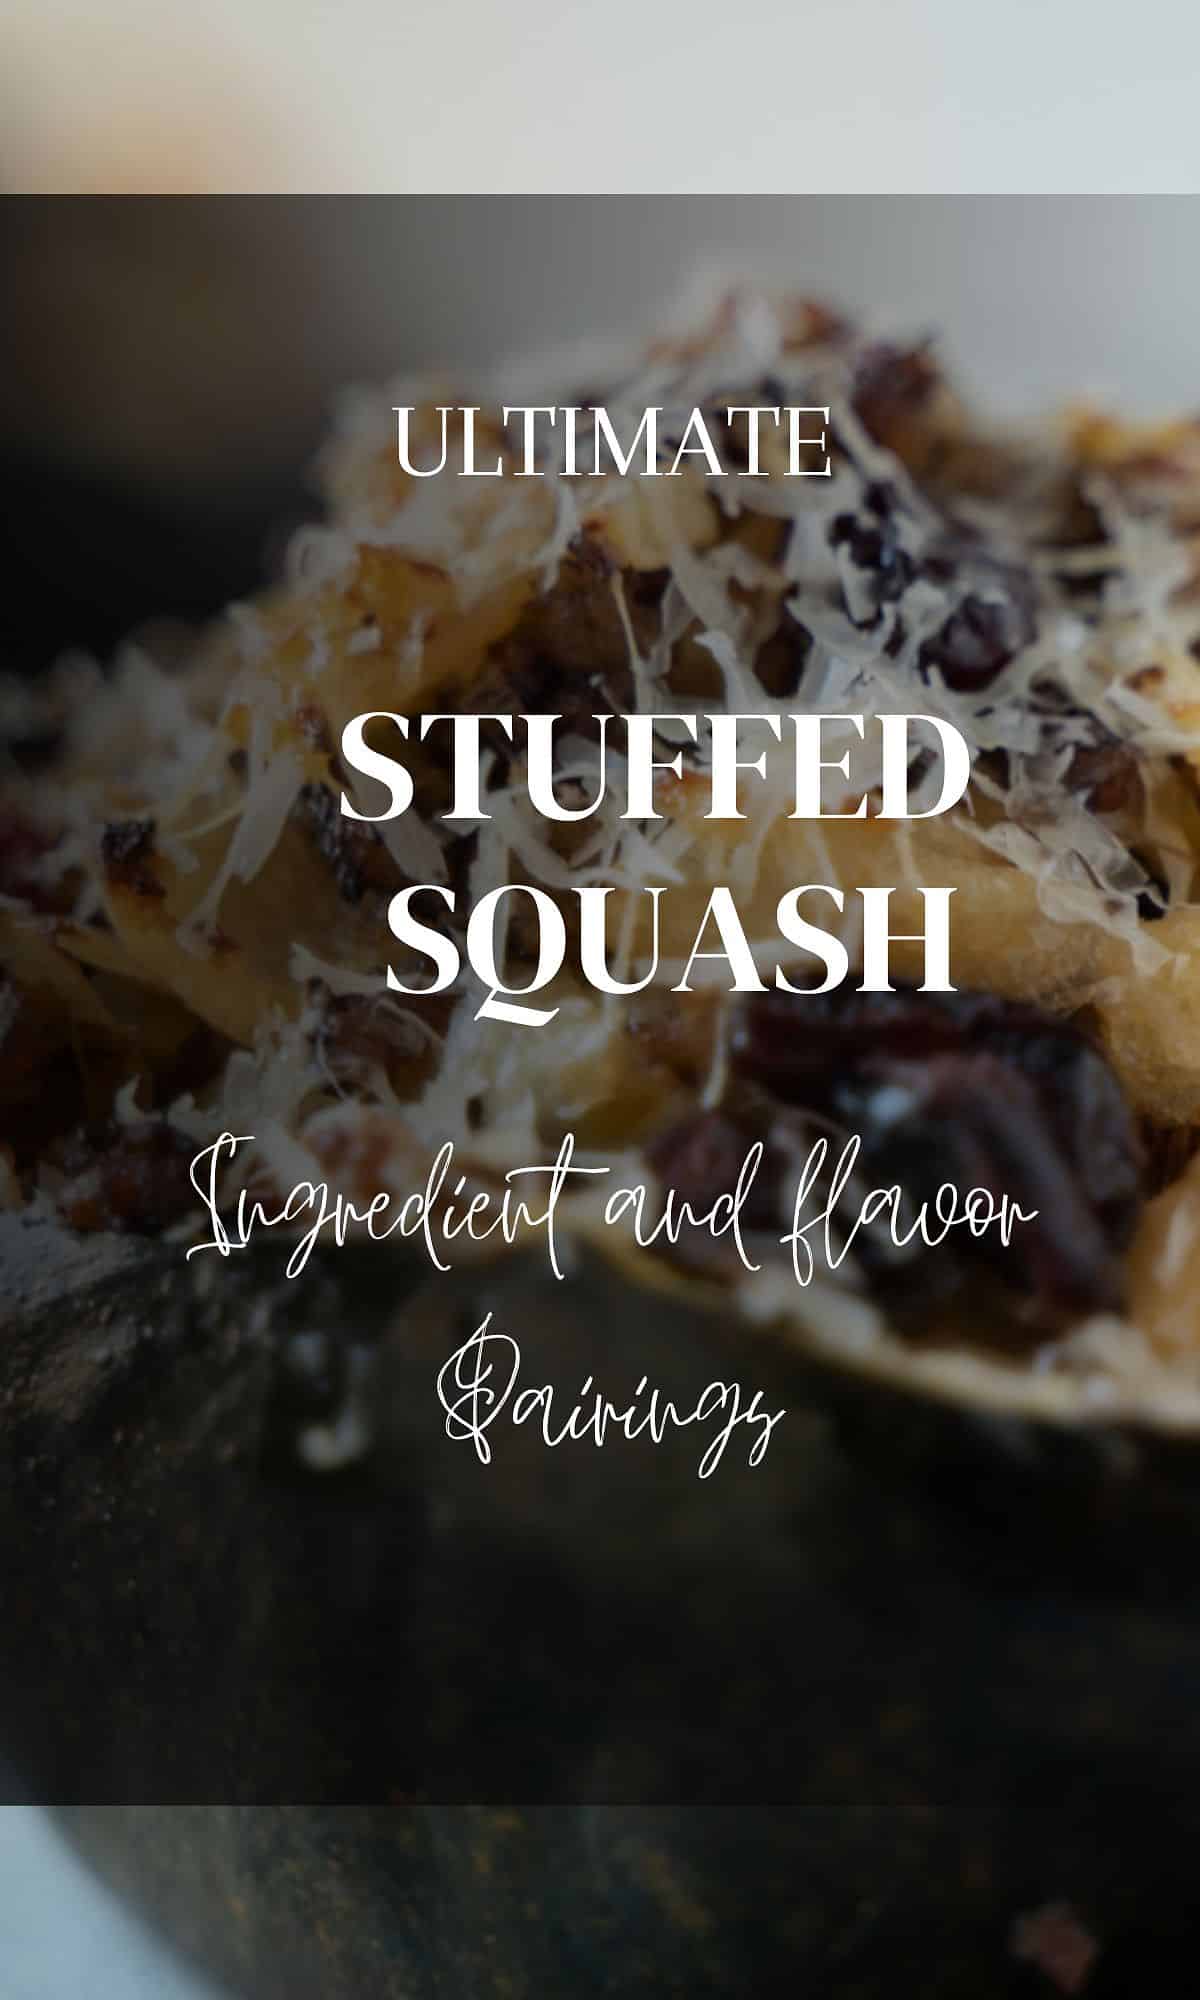 Cover image for the Winter Squash Stuffed Flavor Pairing Guide showing ingredients of Acorn squash, whole onion, english muffin, butter, maple syrup, parmesan cheese resting on grater all on a wood table.